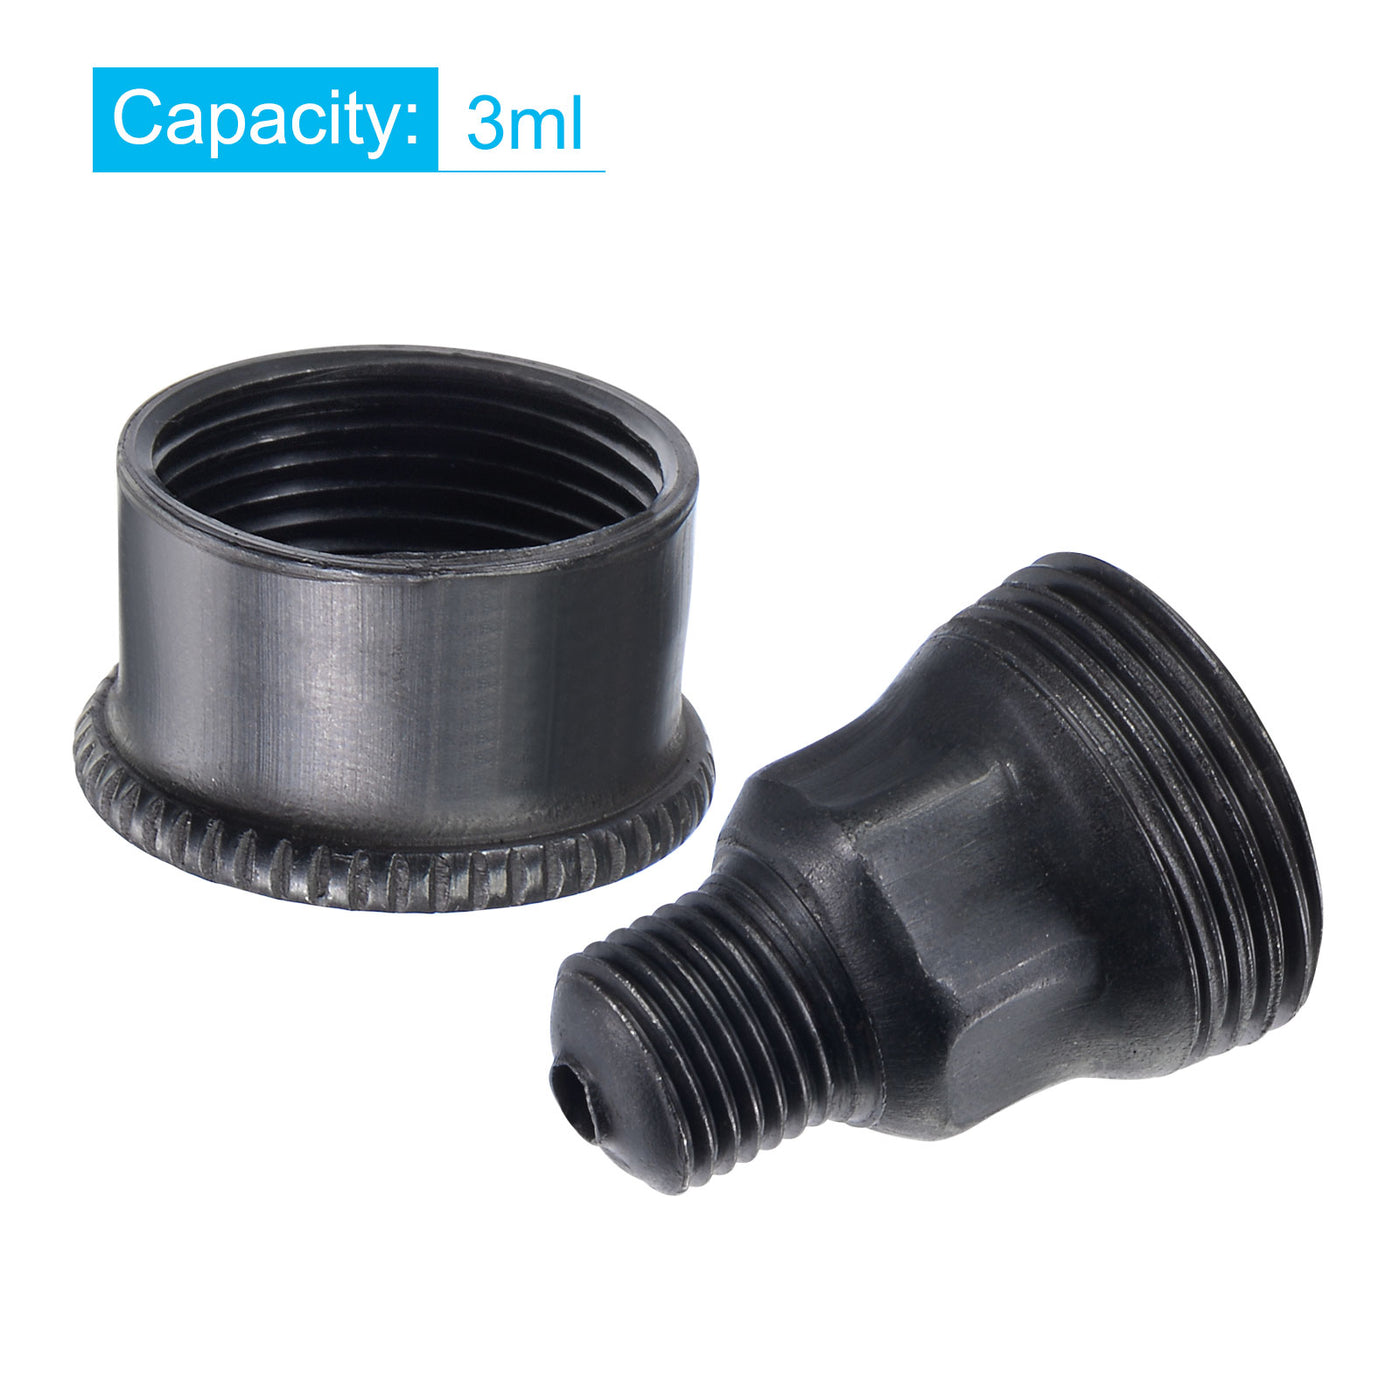 Uxcell Uxcell Machine Parts M10x1 Male Thread 3ml Grease Oil Cup Cap Carbon Steel Oiler Black 2Pcs